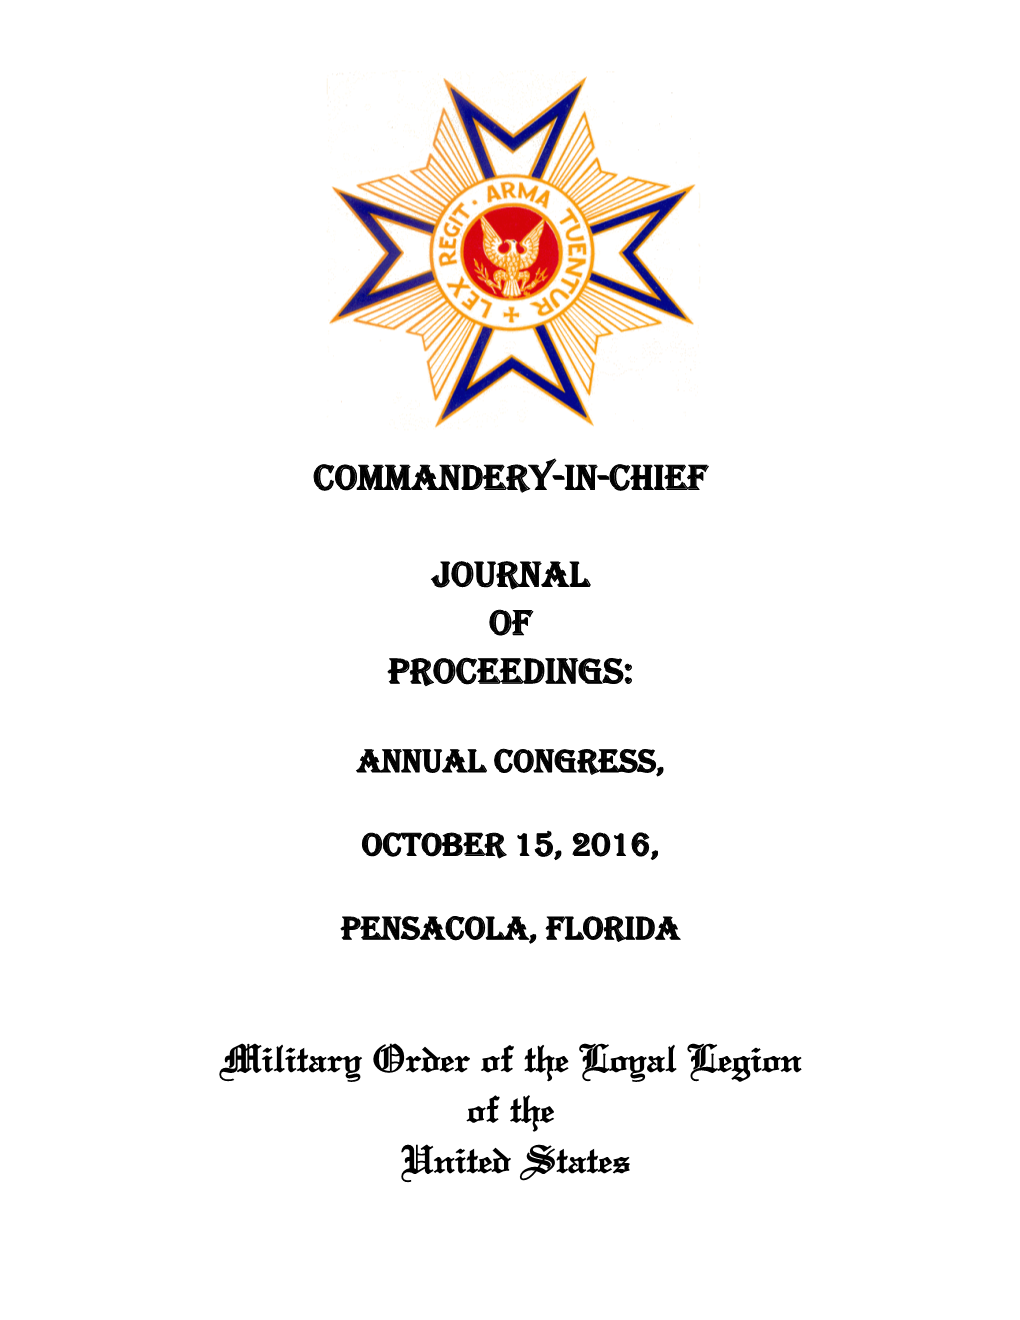 Military Order of the Loyal Legion of the United States